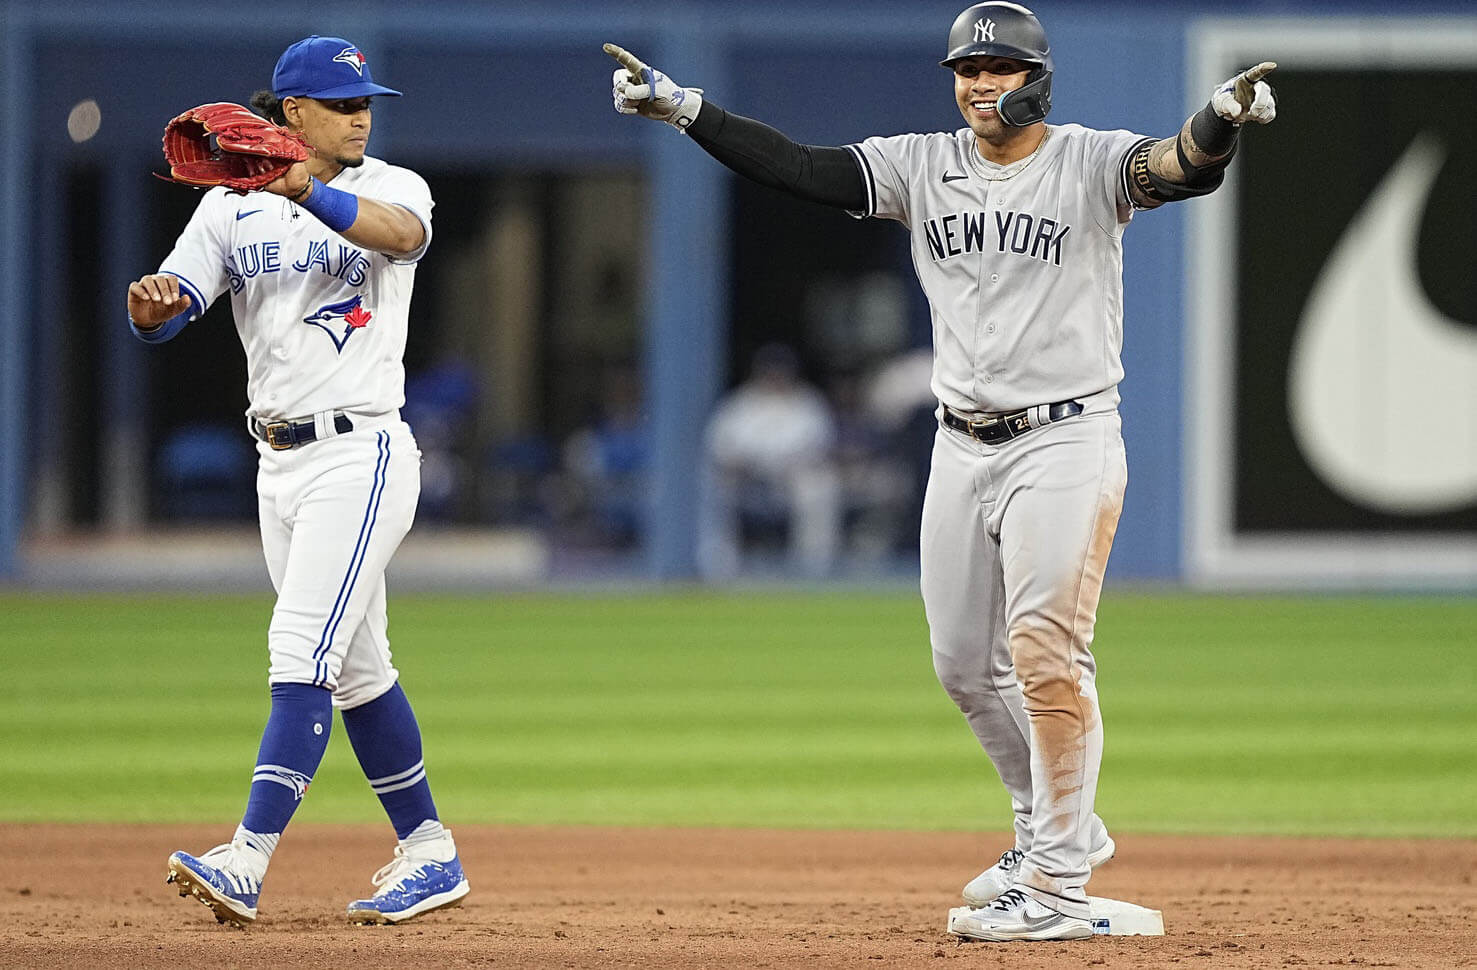 New York Yankees second baseman Gleyber Torres (25) celebrates his double as Toronto Blue Jays shortstop Santiago Espinal (5) looks for the ball during the fifth inning at Rogers Centre.